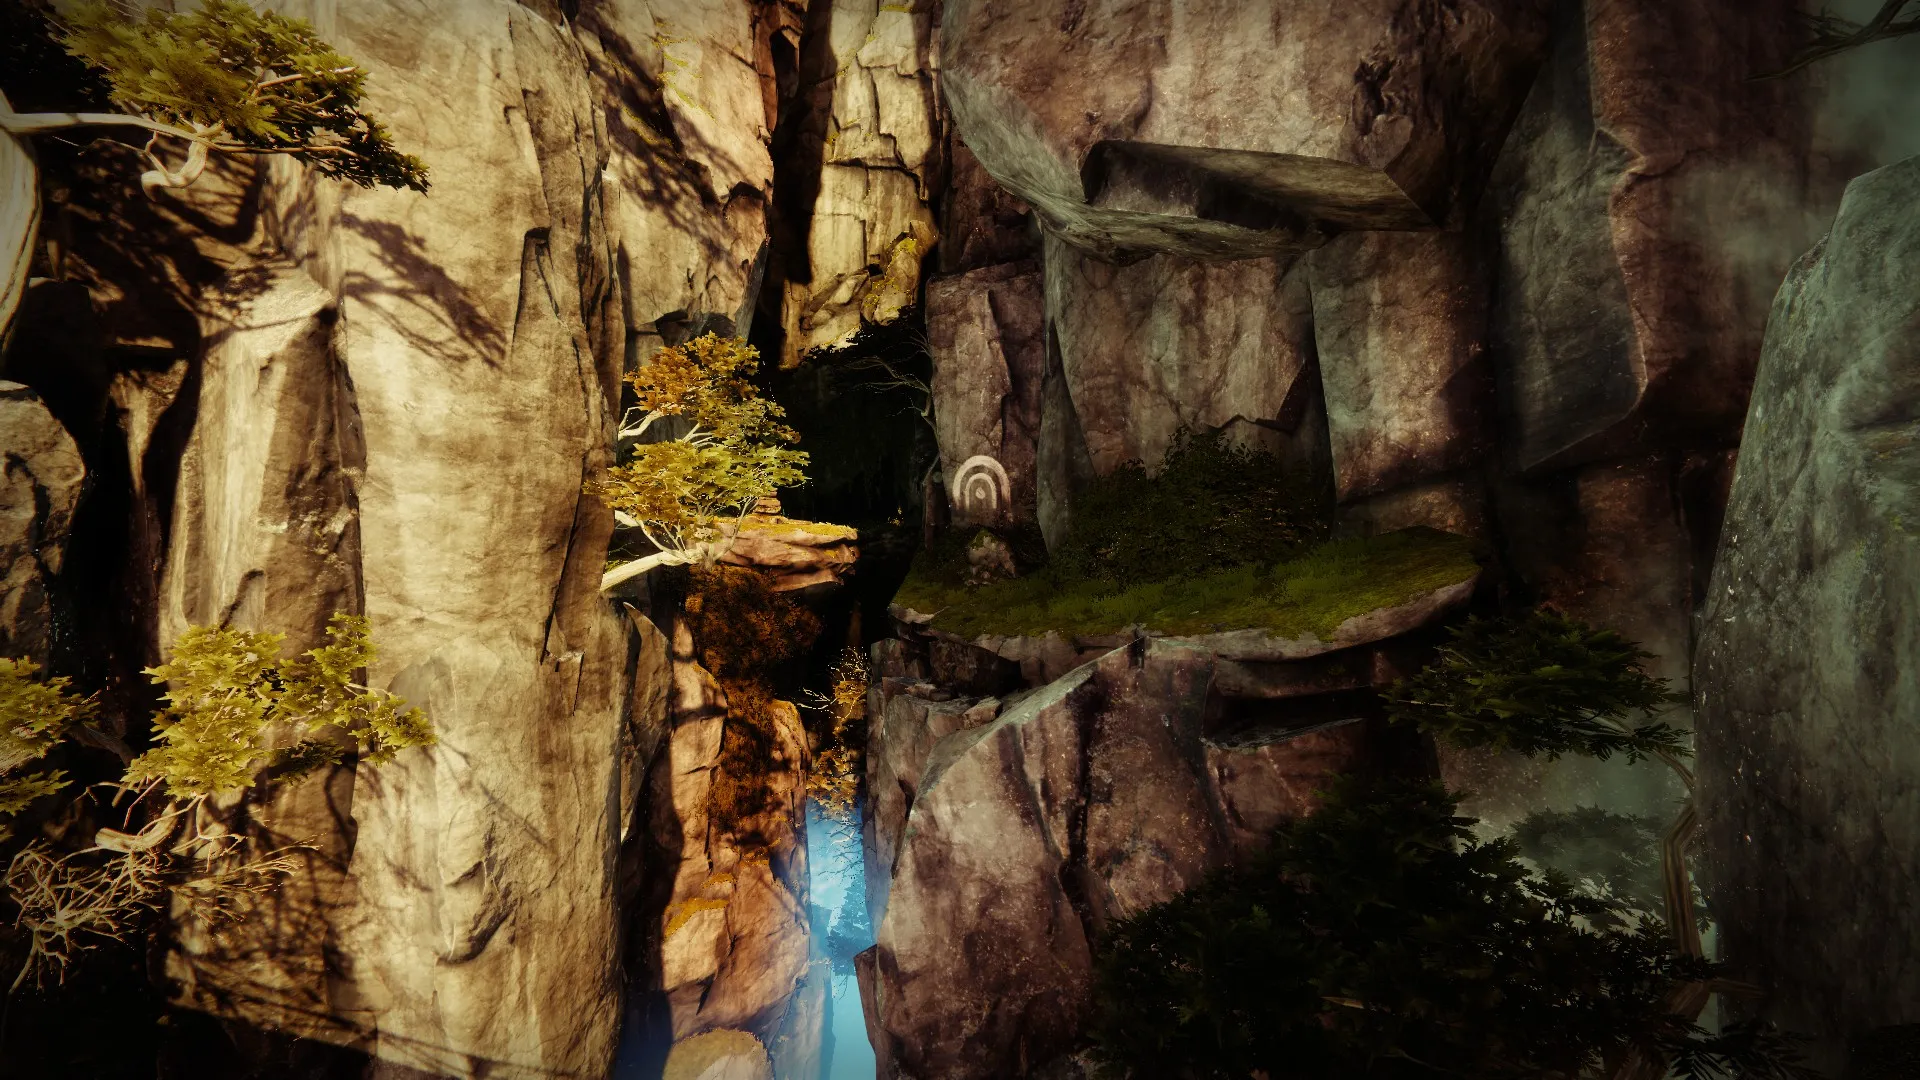 A cliffside with a Lost Sector symbol on the center of the frame and a ledge on the left side.